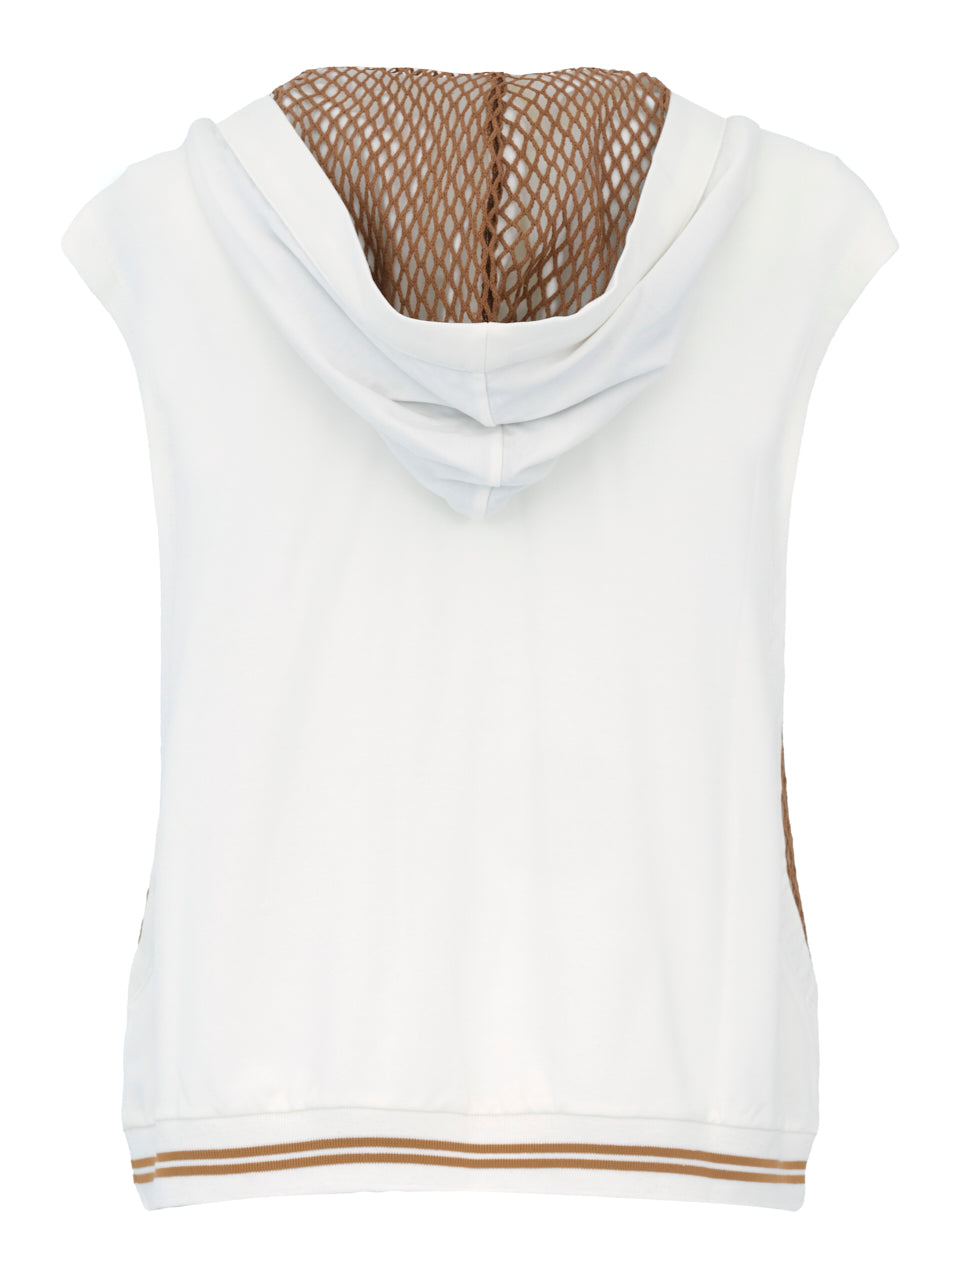 EverSassy Spring 2023 women's casual sleeveless mesh accent hoodie vest loungewear top - back